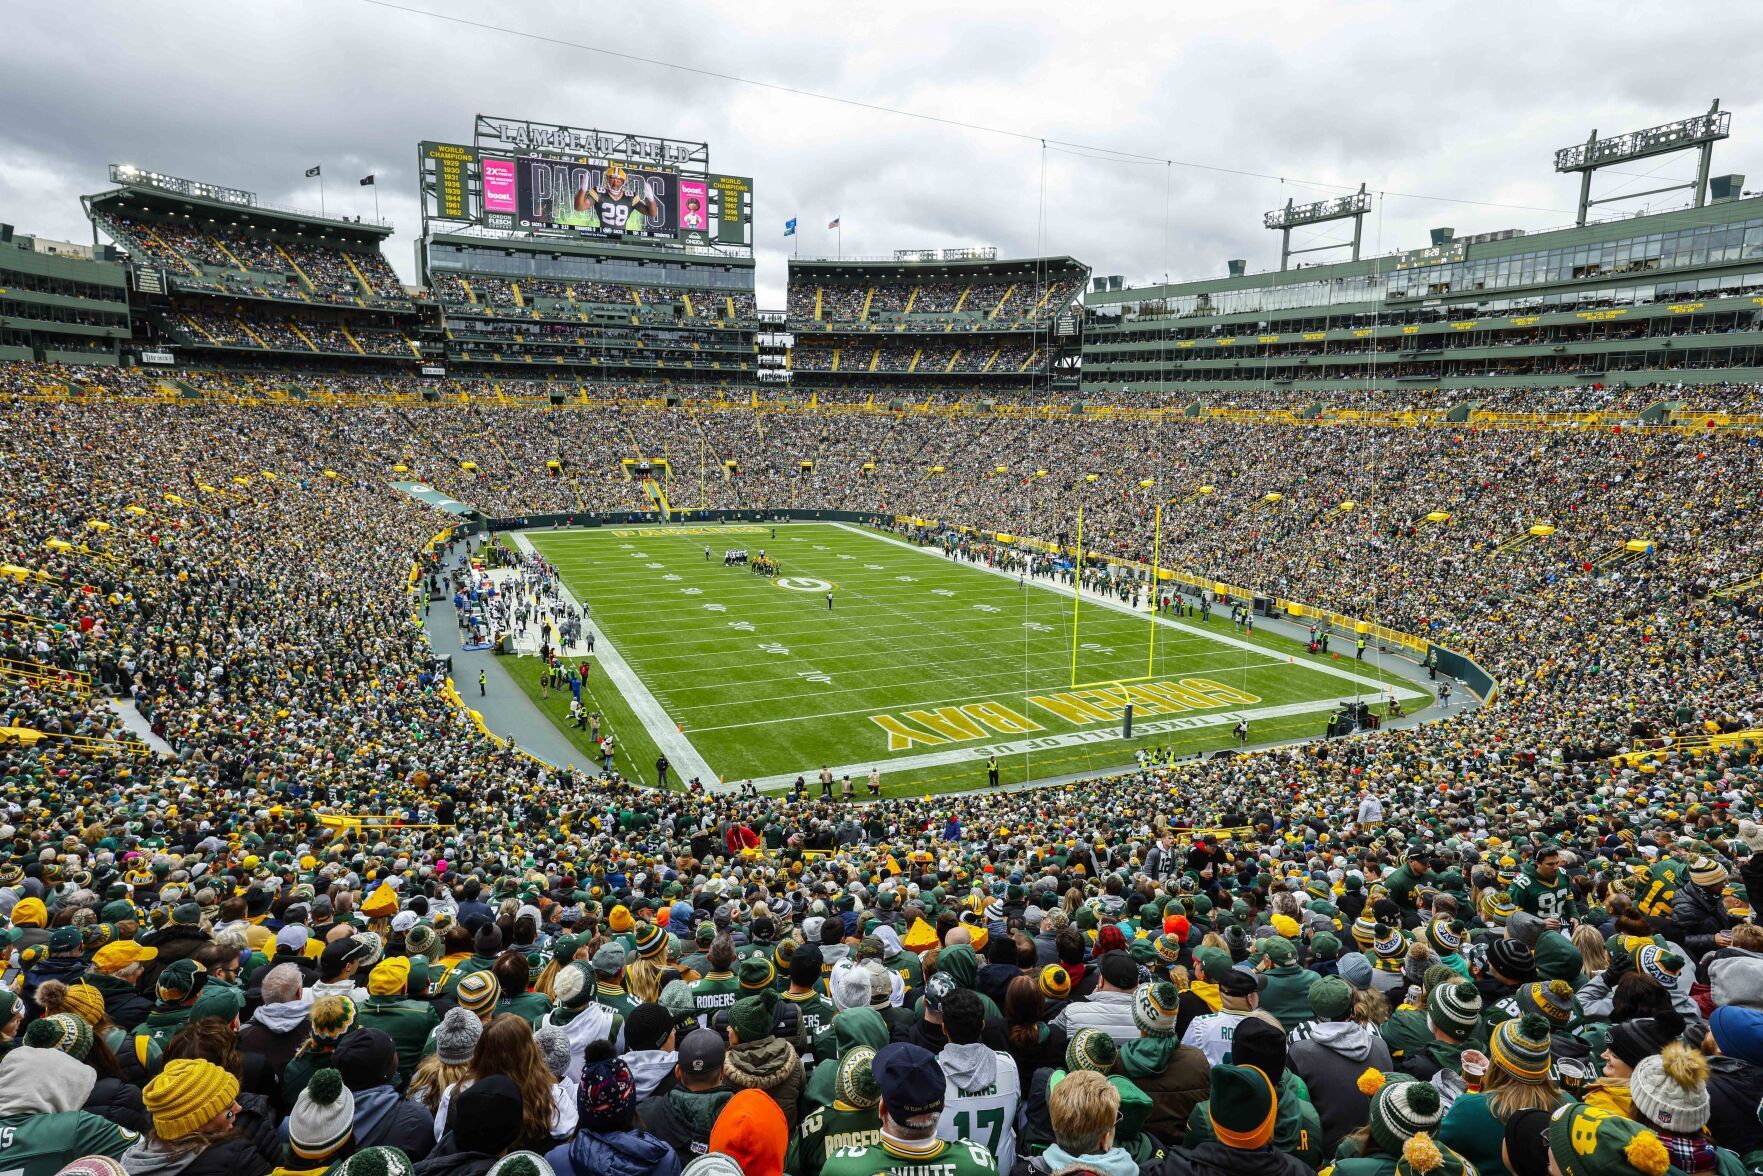 Heres how Madison viewers can watch the Packers Thursday night game against the Titans